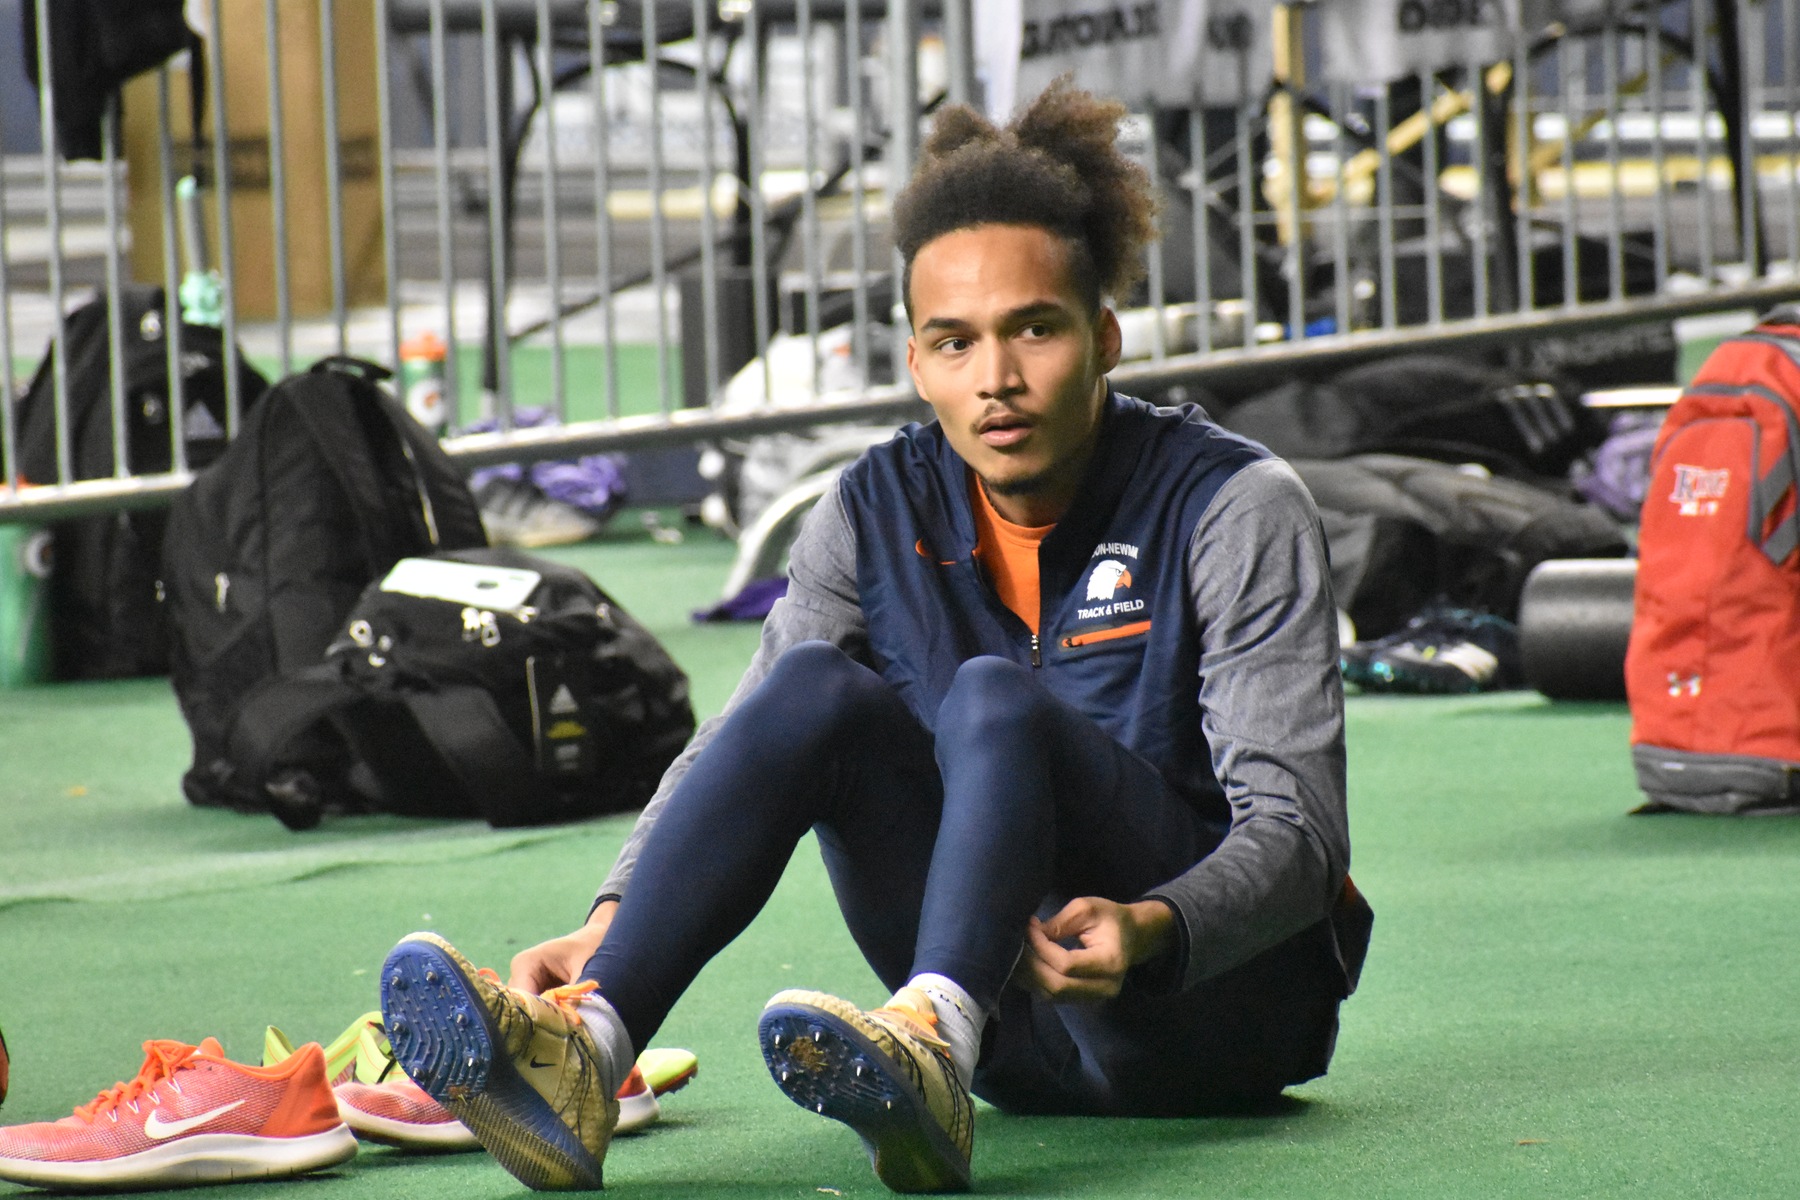 Eagles aim for a repeat performance heading into the SAC Indoor Championships